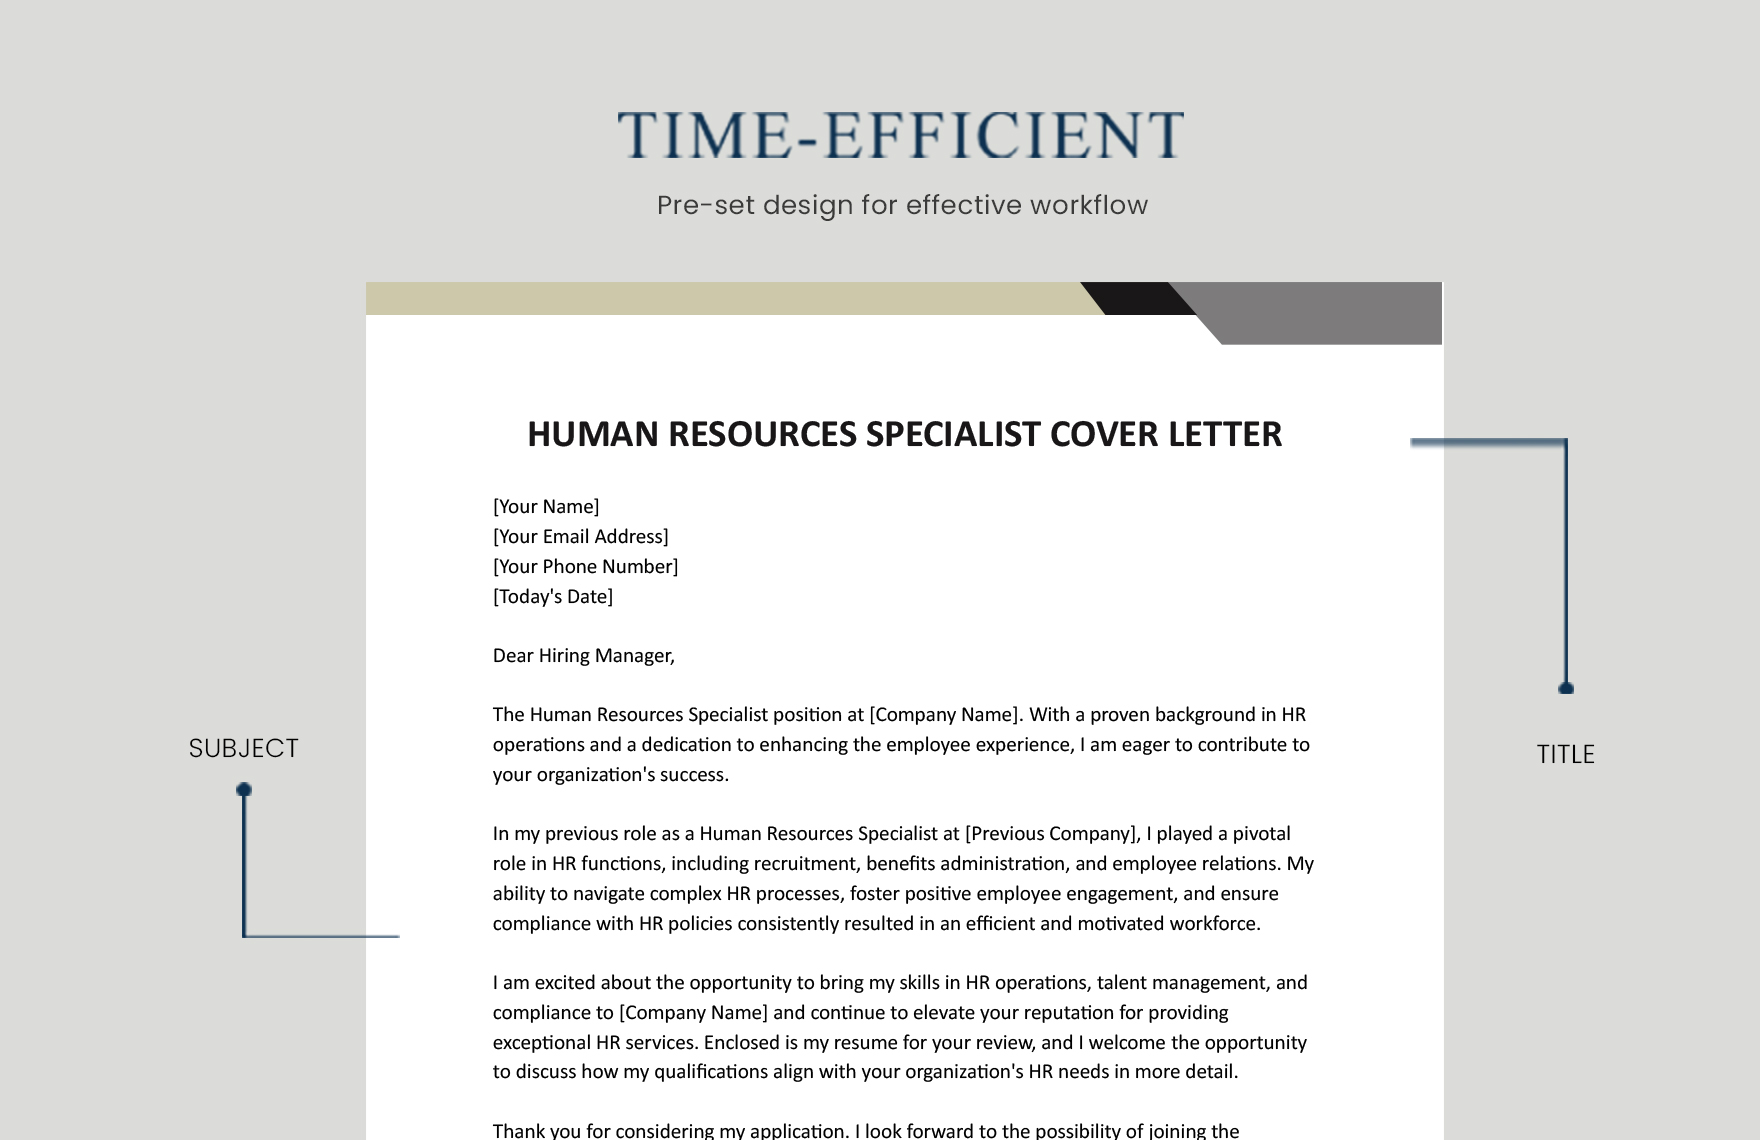 Human Resources Specialist Cover Letter